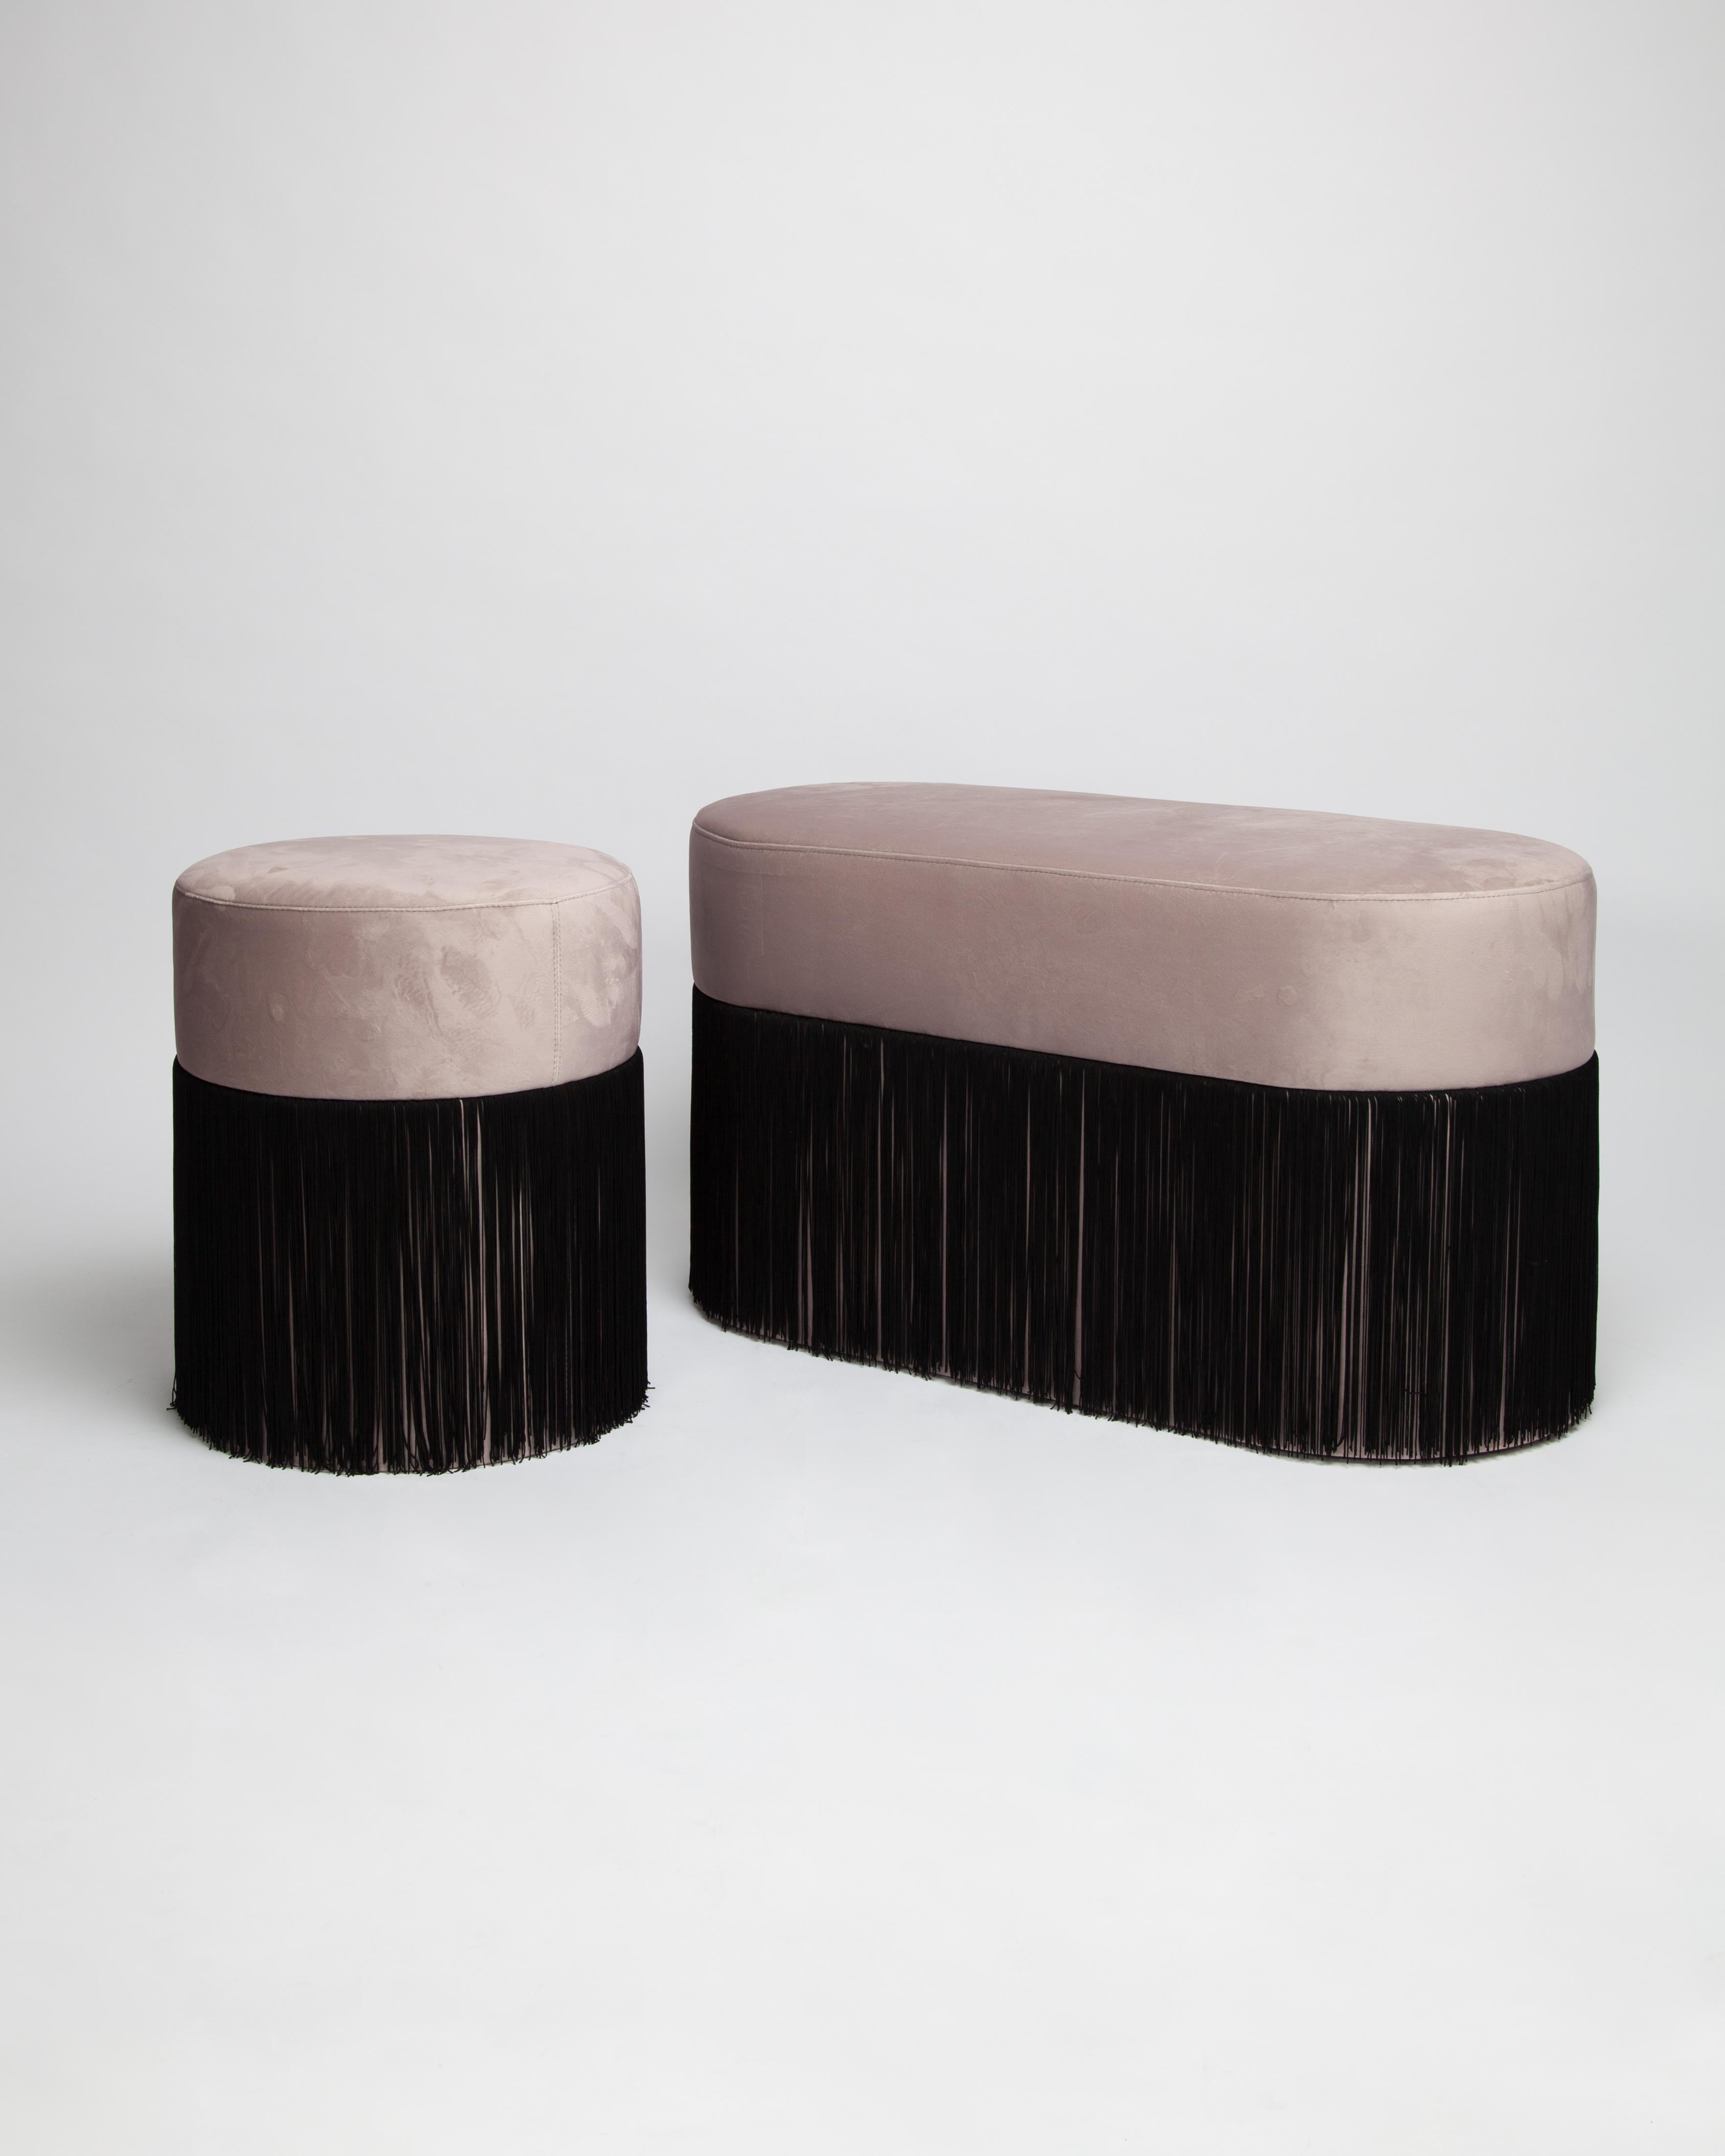 Spanish Pouf Pill L by Houtique For Sale